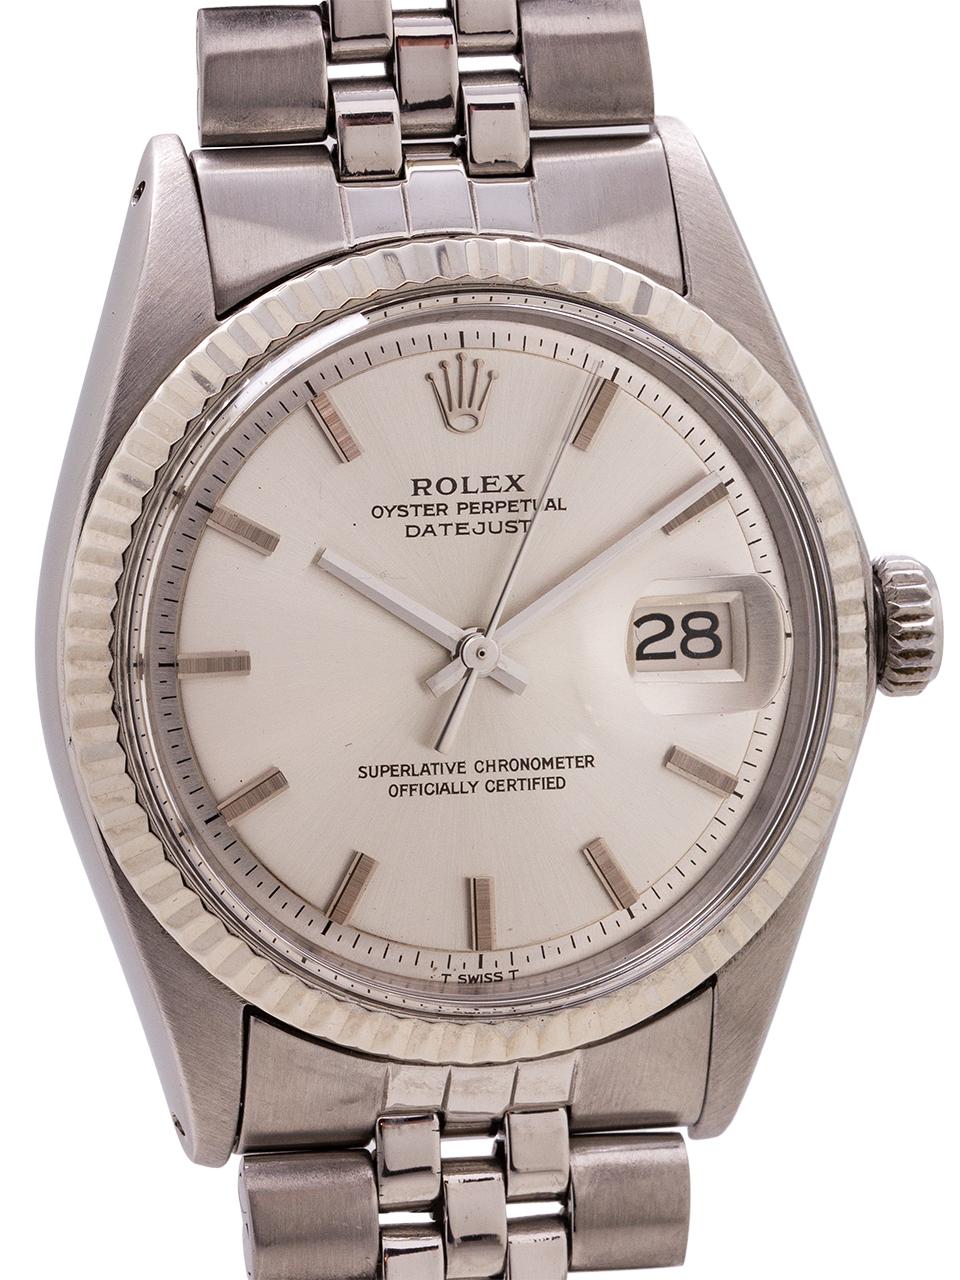 
Rolex Datejust stainless steel ref 1601, serial# 2.3 million circa 1968. Featuring 36mm diameter Oyster case with acrylic crystal, 14K white gold fluted bezel, and very distinctive silver satin pie-pan dial with applied silver indexes and silver